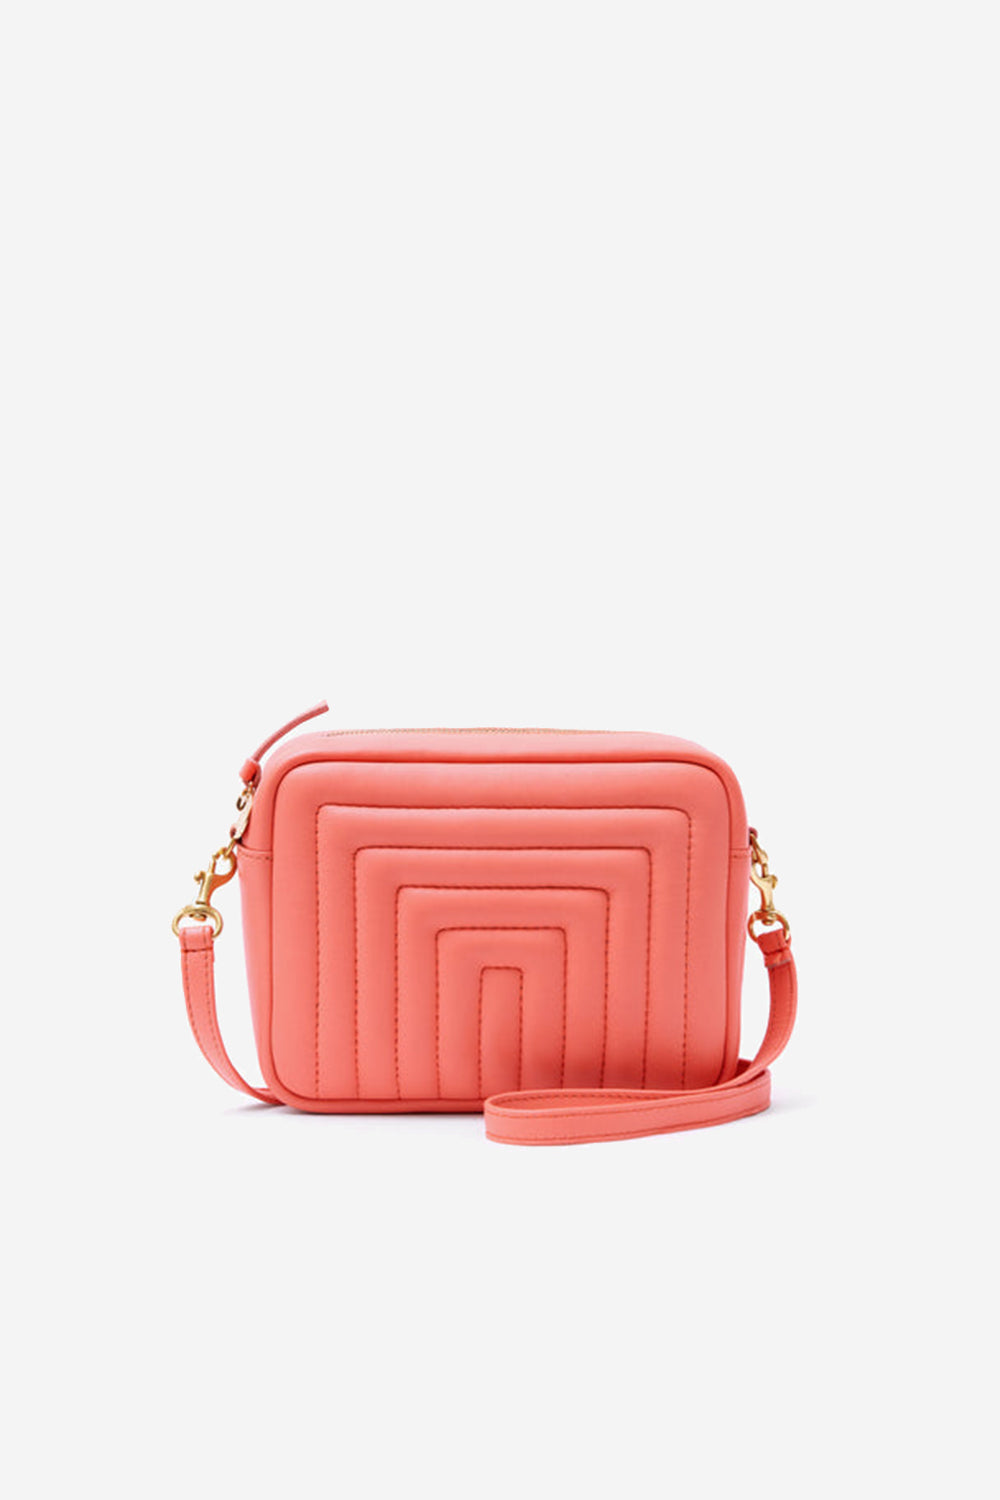 Midi Sac Channel Quilted Coral